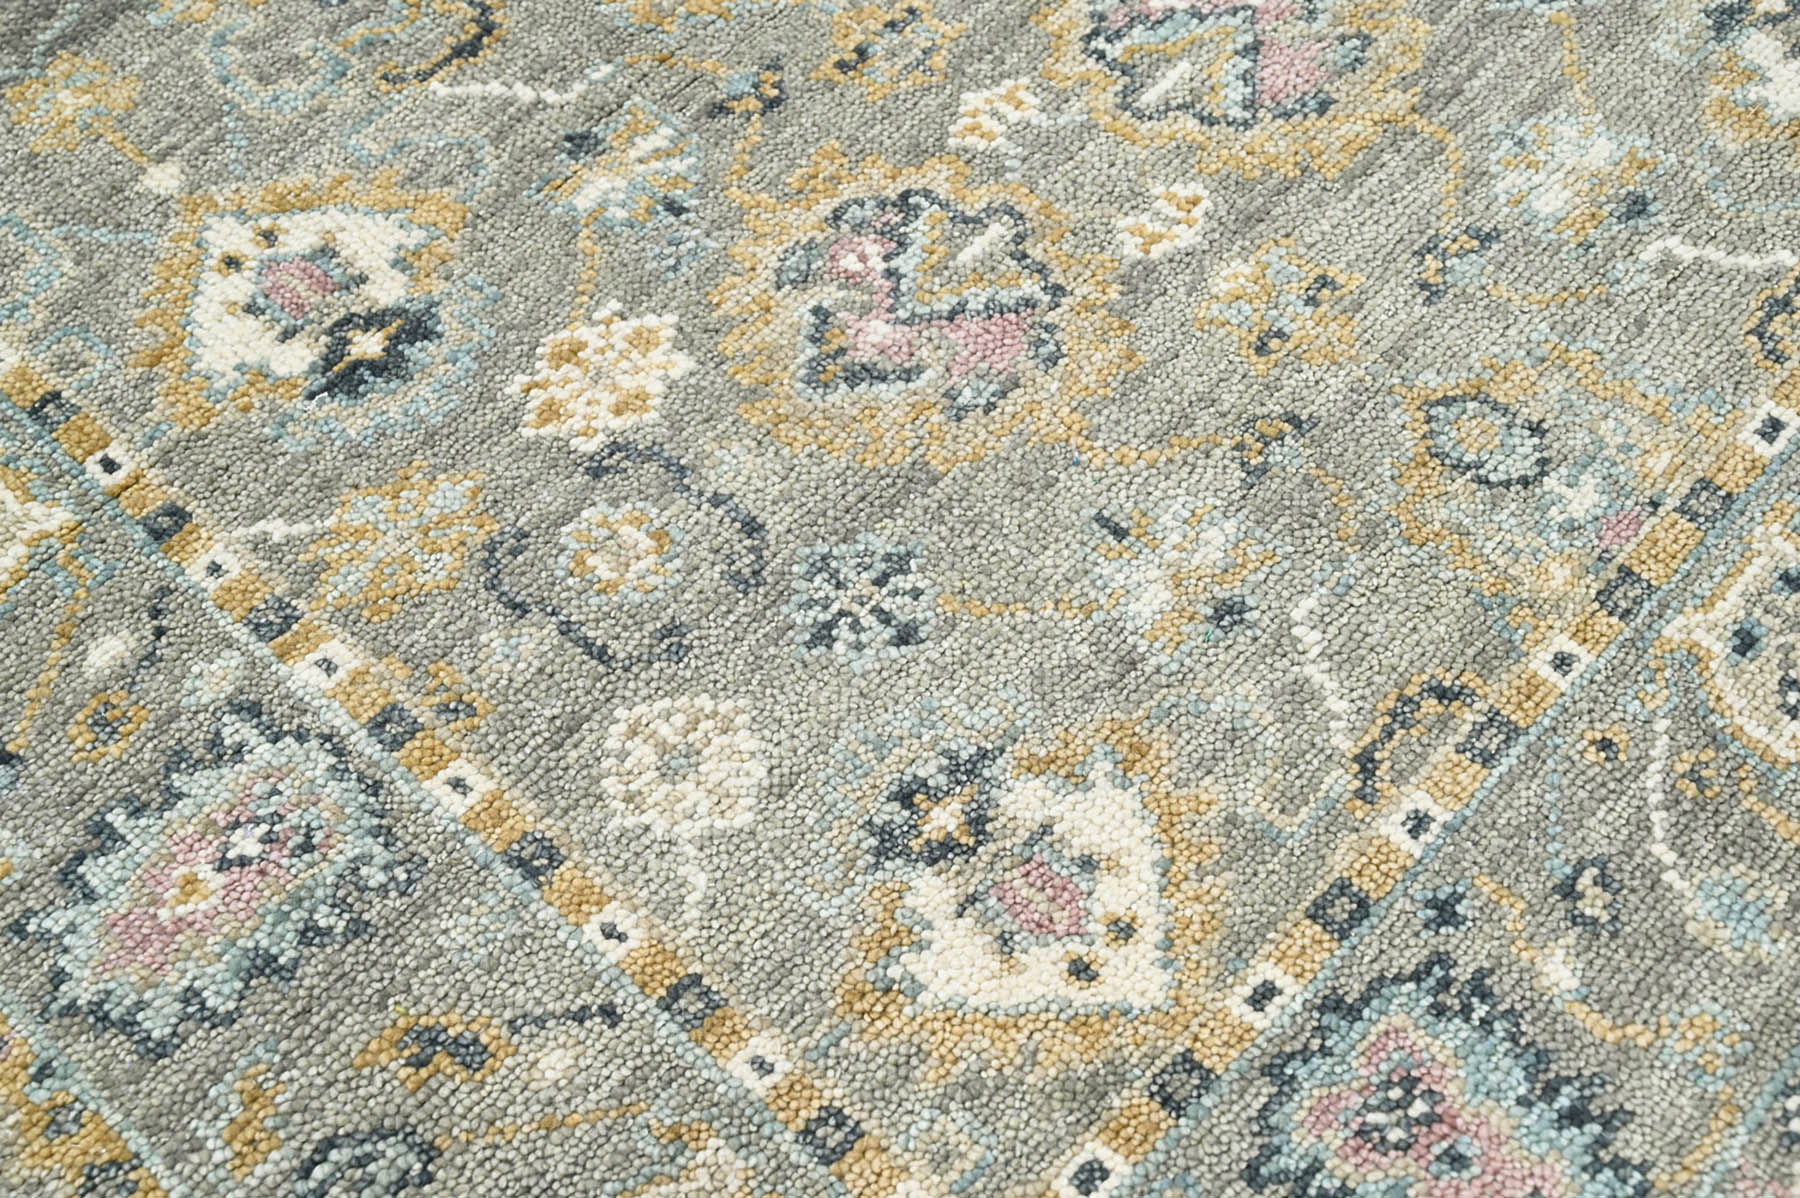 Multi Size Gray, Light Gold Hand Knotted 100% Wool Indo Oushak Traditional Oriental Area Rug